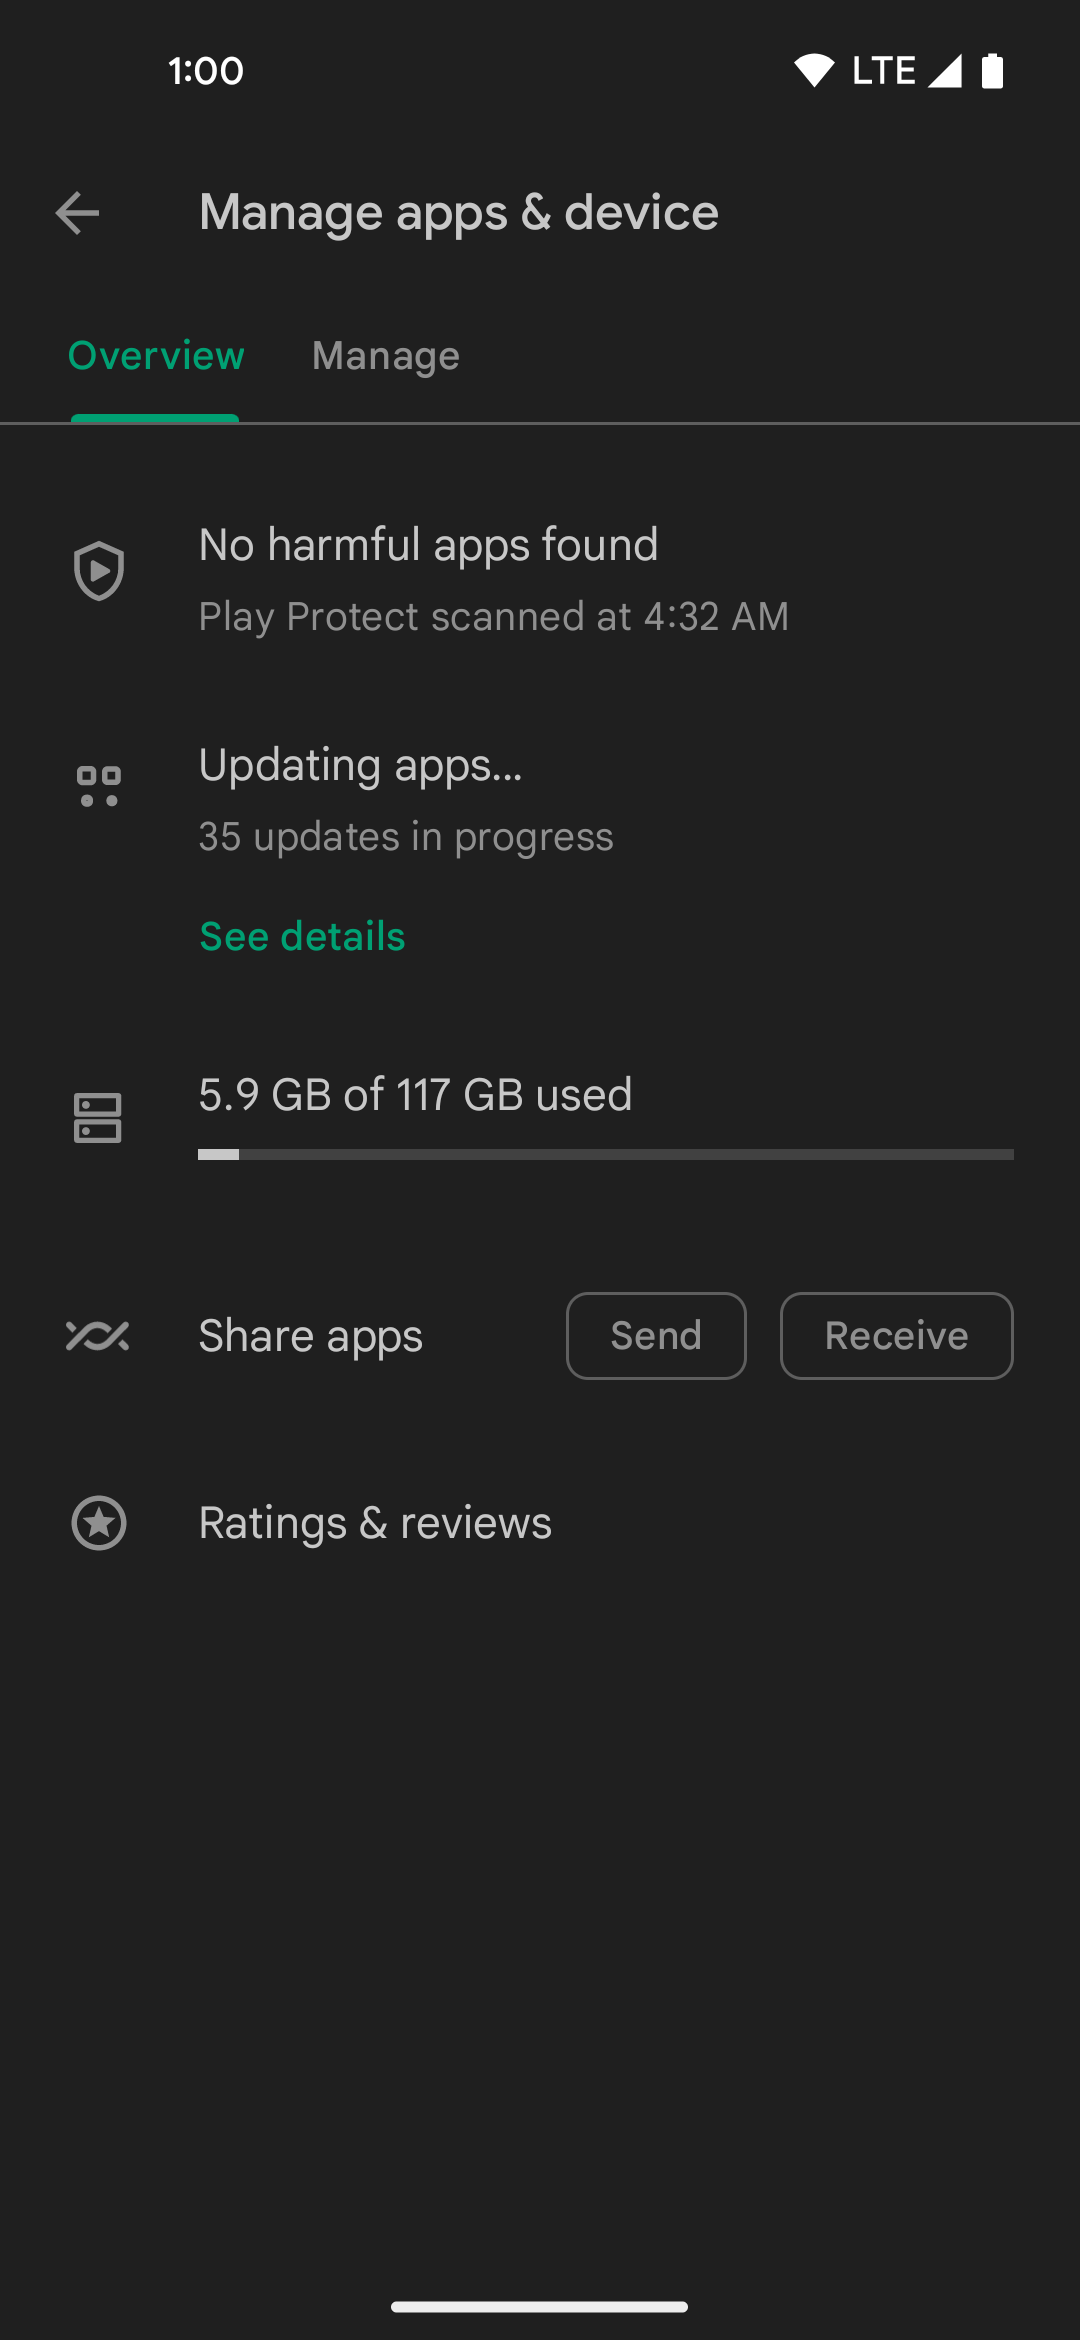 Installing app updates on a new Android phone